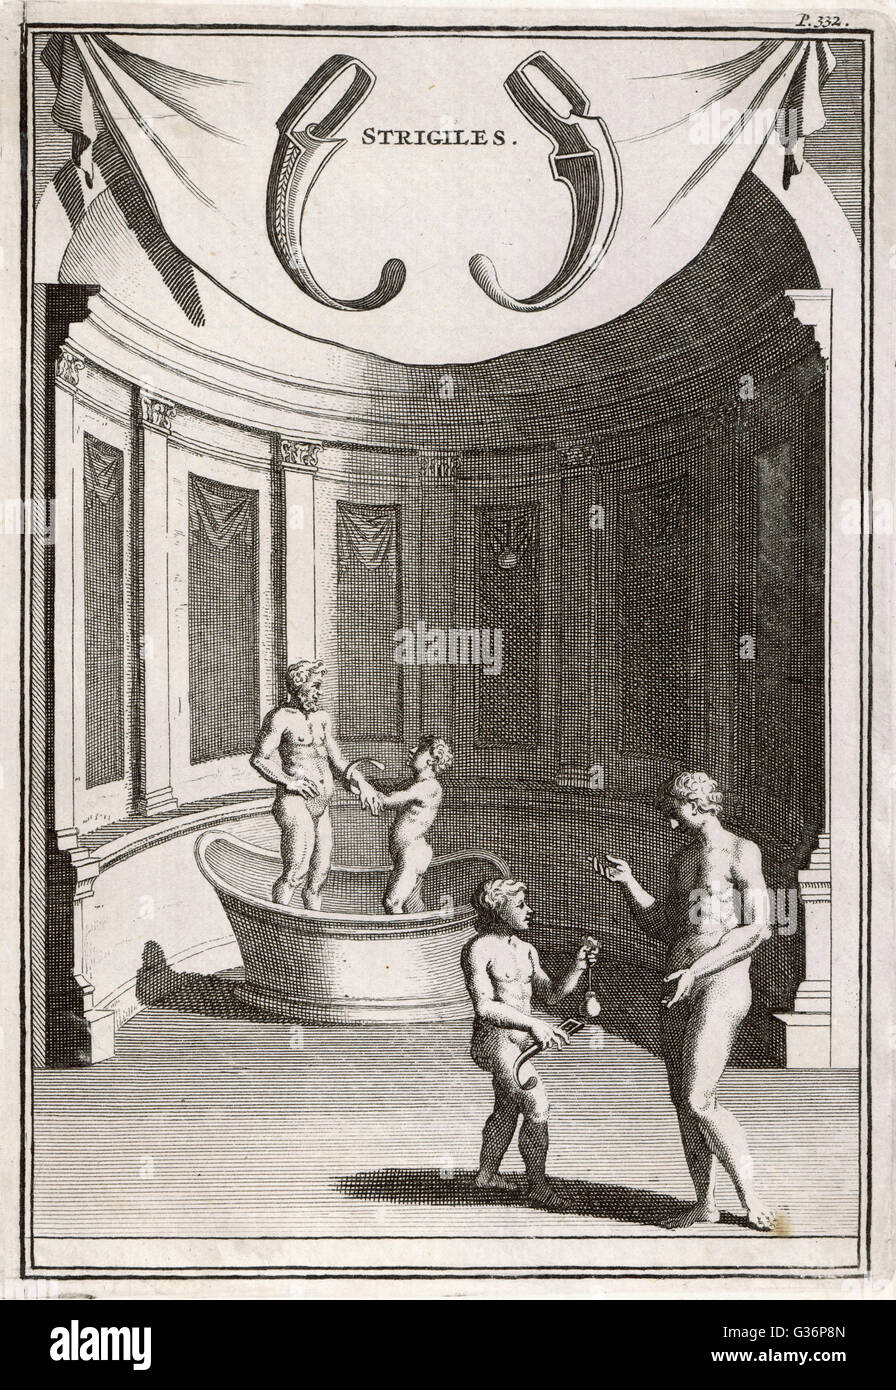 Bathing and washing in Ancient Rome.  Men and boys using 'strigiles' in a bath house.  The strigil was a small, curved, metal tool used in ancient Greece and Rome to scrape dirt and sweat from the body before the invention of soap.  Perfumed oil was first Stock Photo